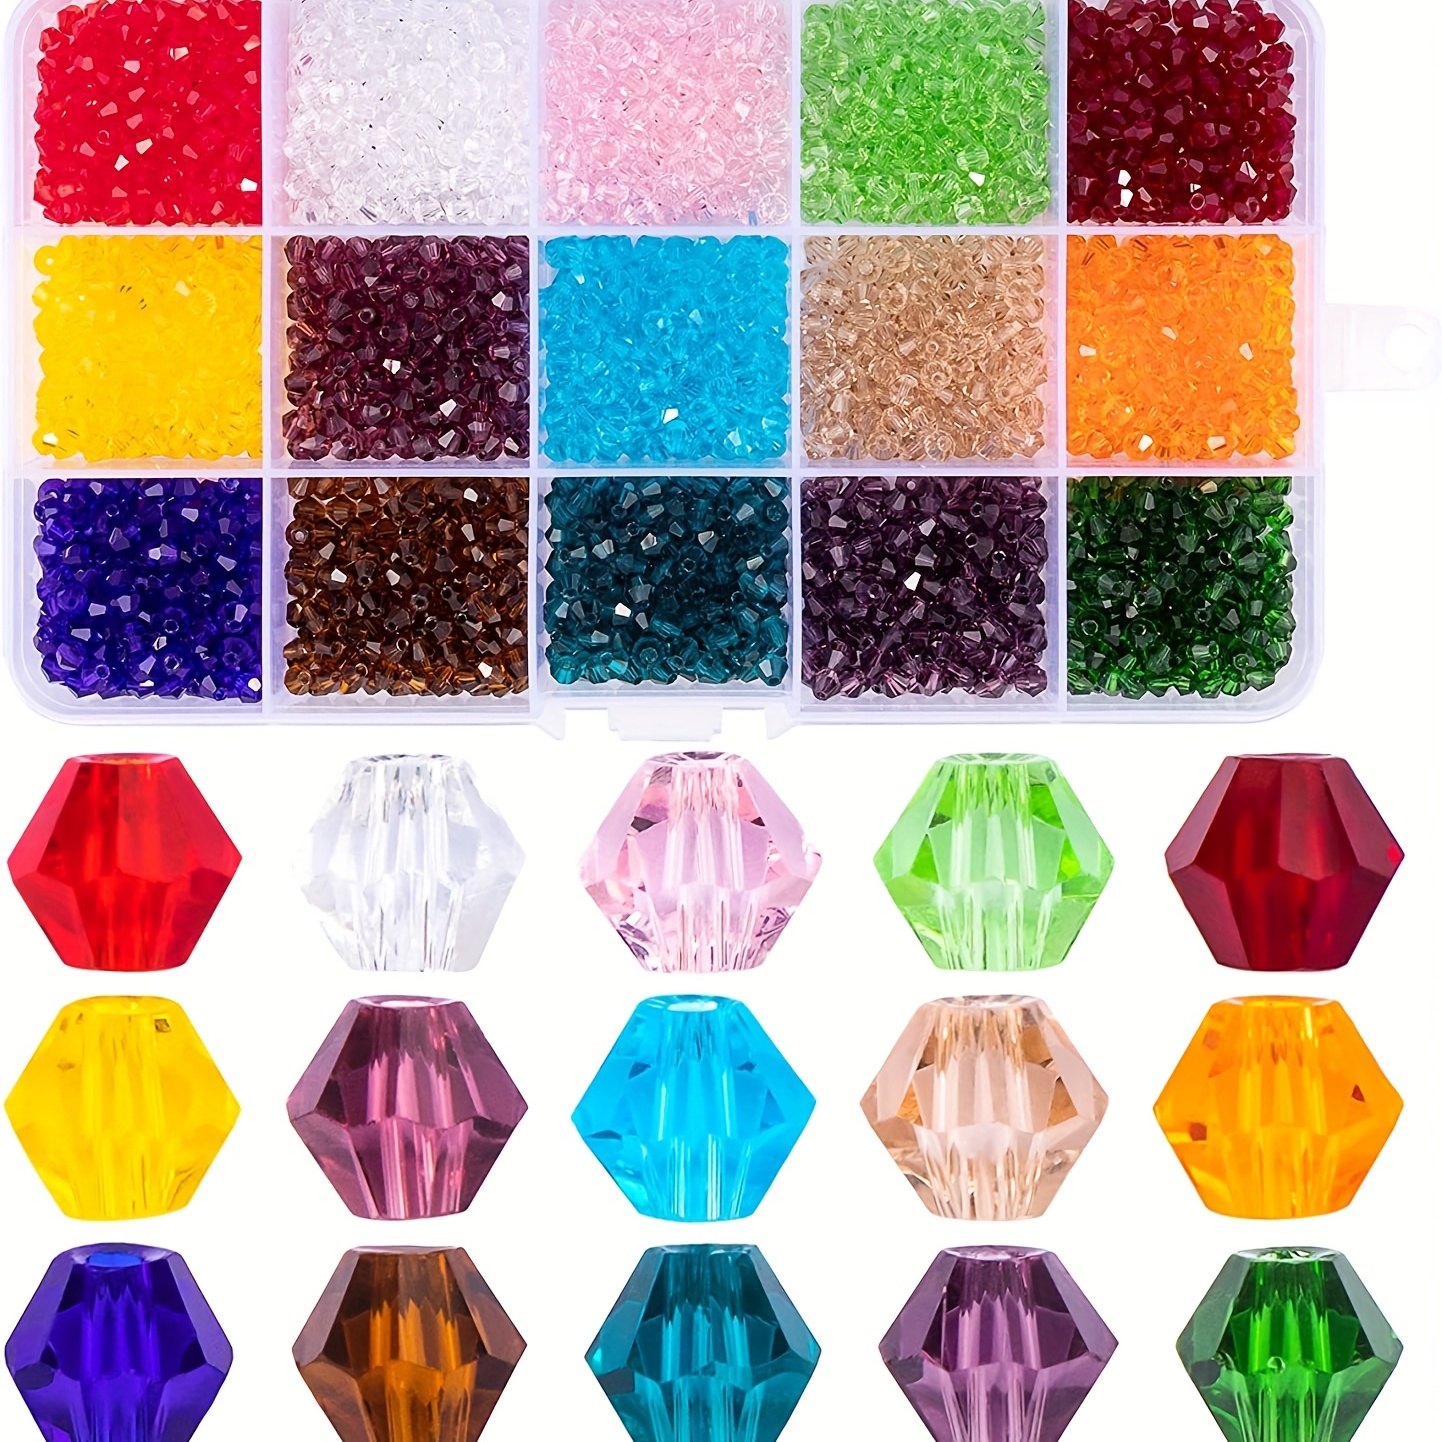 

1500pcs Bicone Glass Beads 4mm Bicone Crystal Beads For Jewelry Making Faceted Crystal Glass Beads 15 Colors For Diy Beading Projects Bracelets Necklaces Earrings Suncatcher Crafts